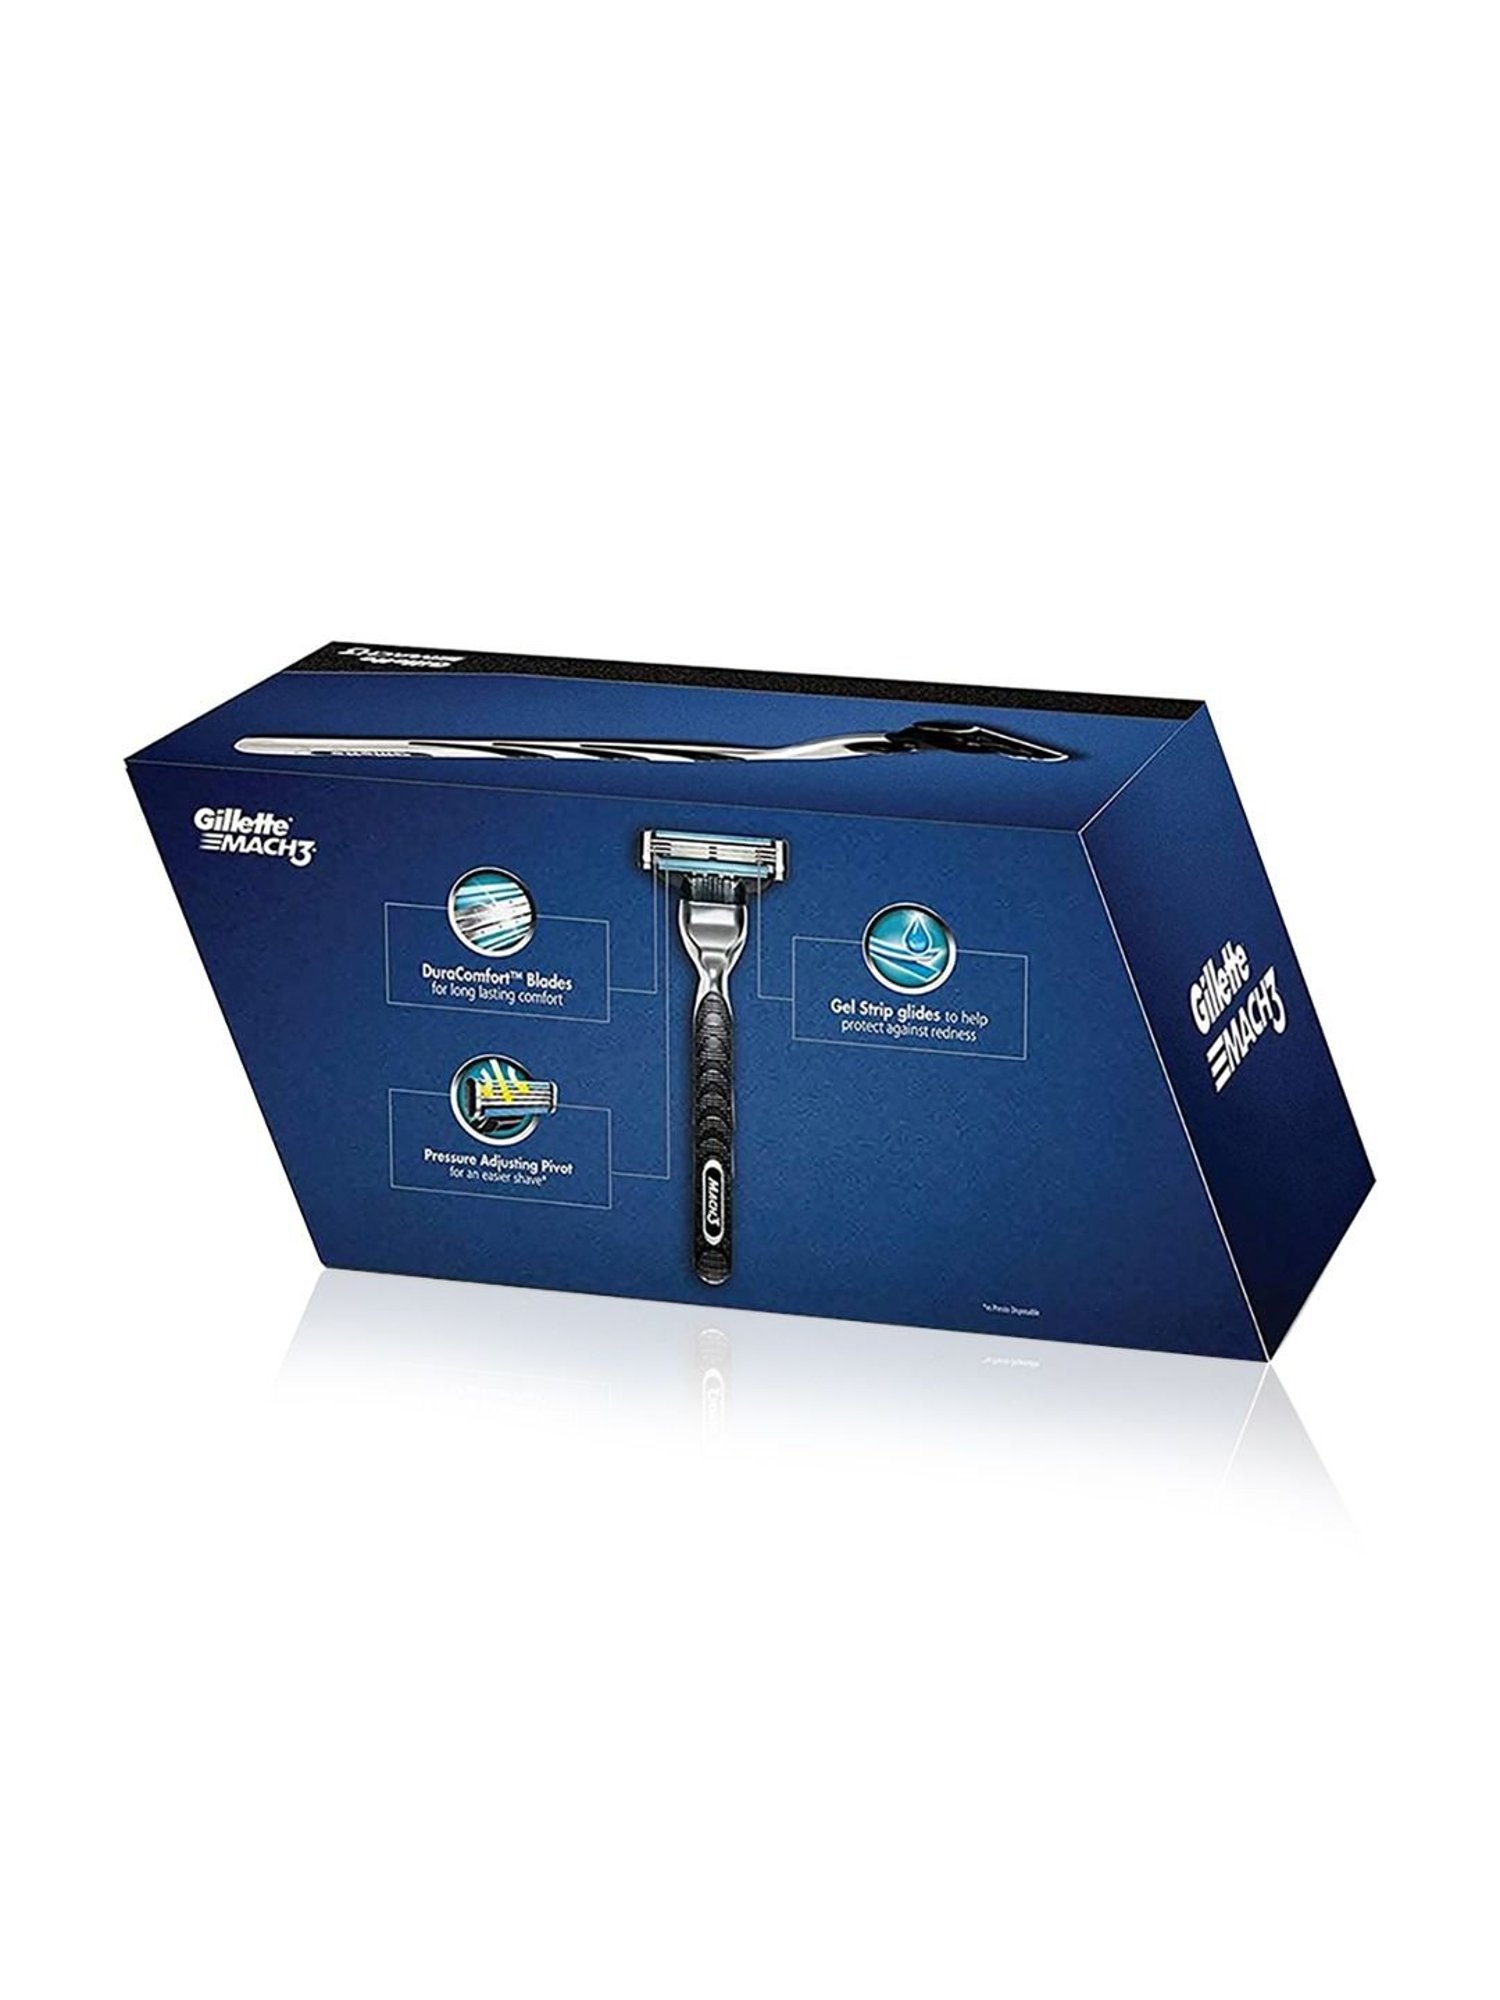 Buy Gillette Guard 5 in 1 Shaving Kit with a Travel Pouch, 1 Razor, 6  blades, 1 Shaving Cream, 1 Shaving brush | Combo Grooming Kit | Gift Set  for Men Online at Low Prices in India - Amazon.in